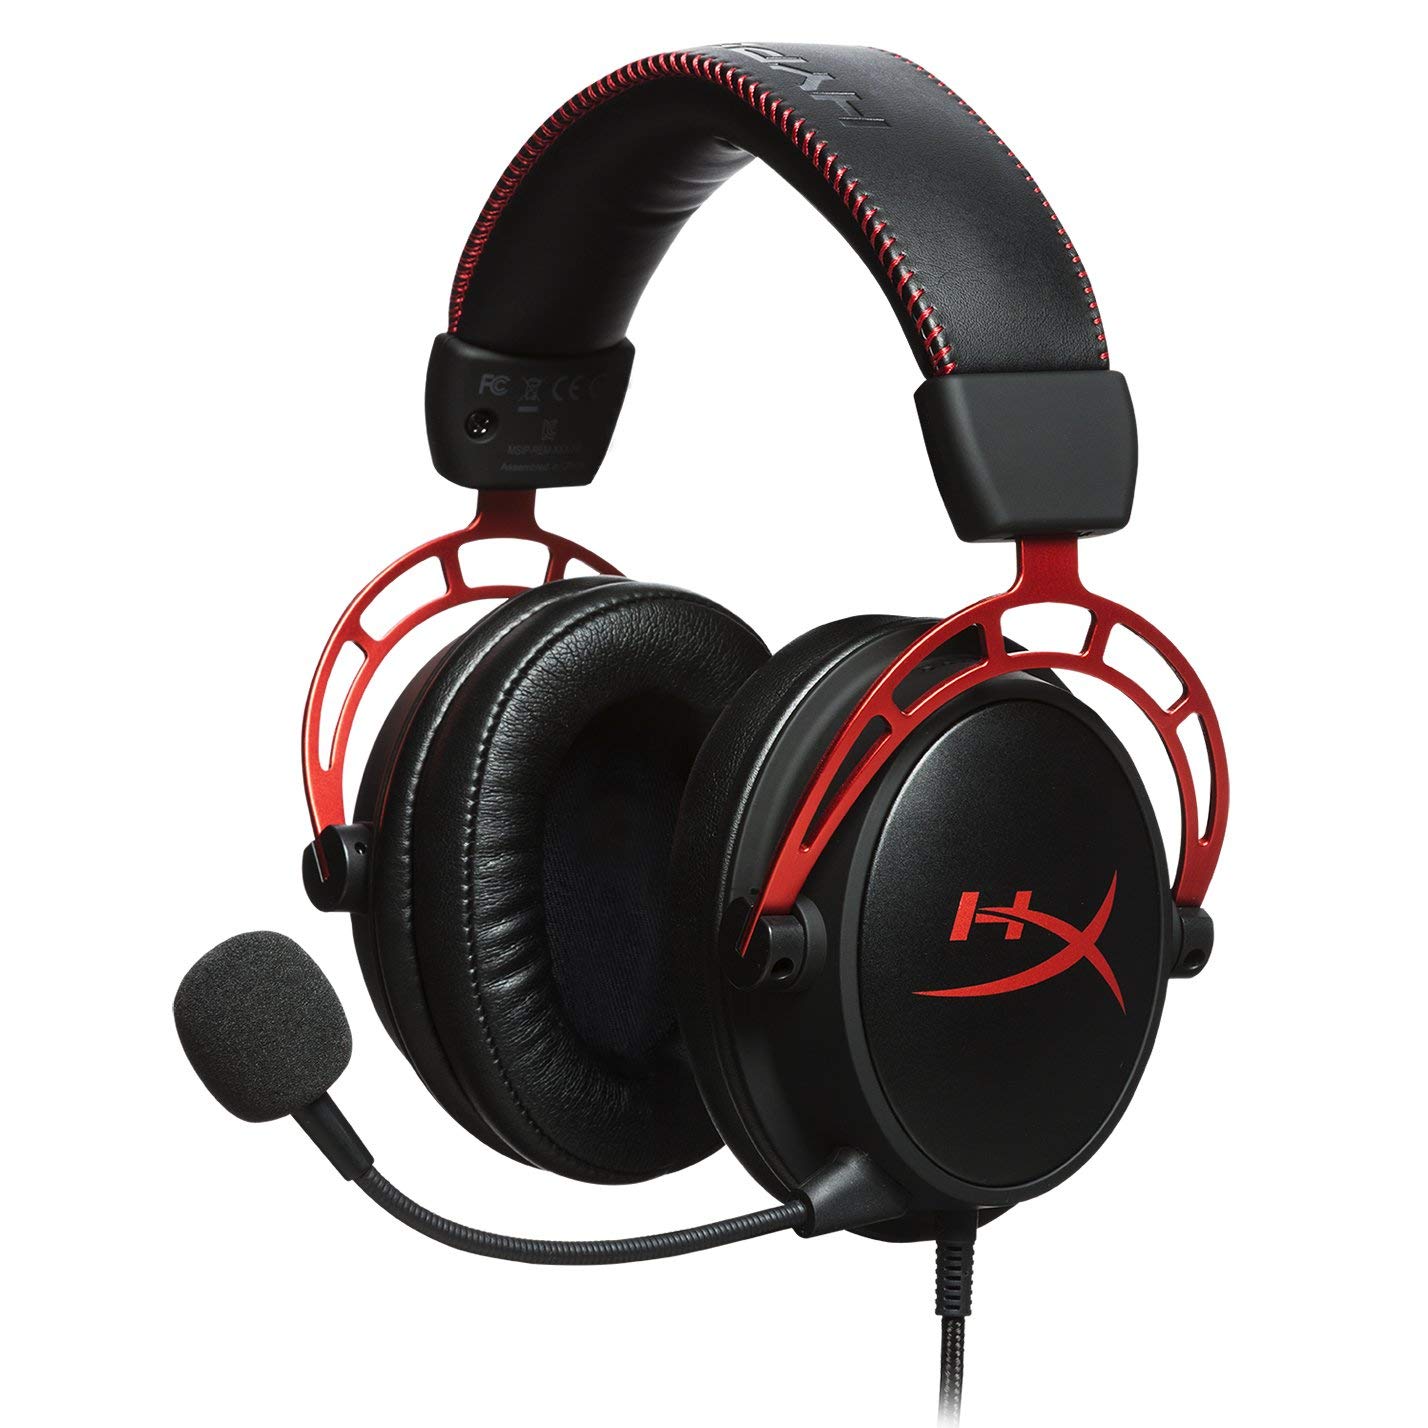 Hear Every Footstep When Use The Best Headset | Reviews, Ratings, Comparisons